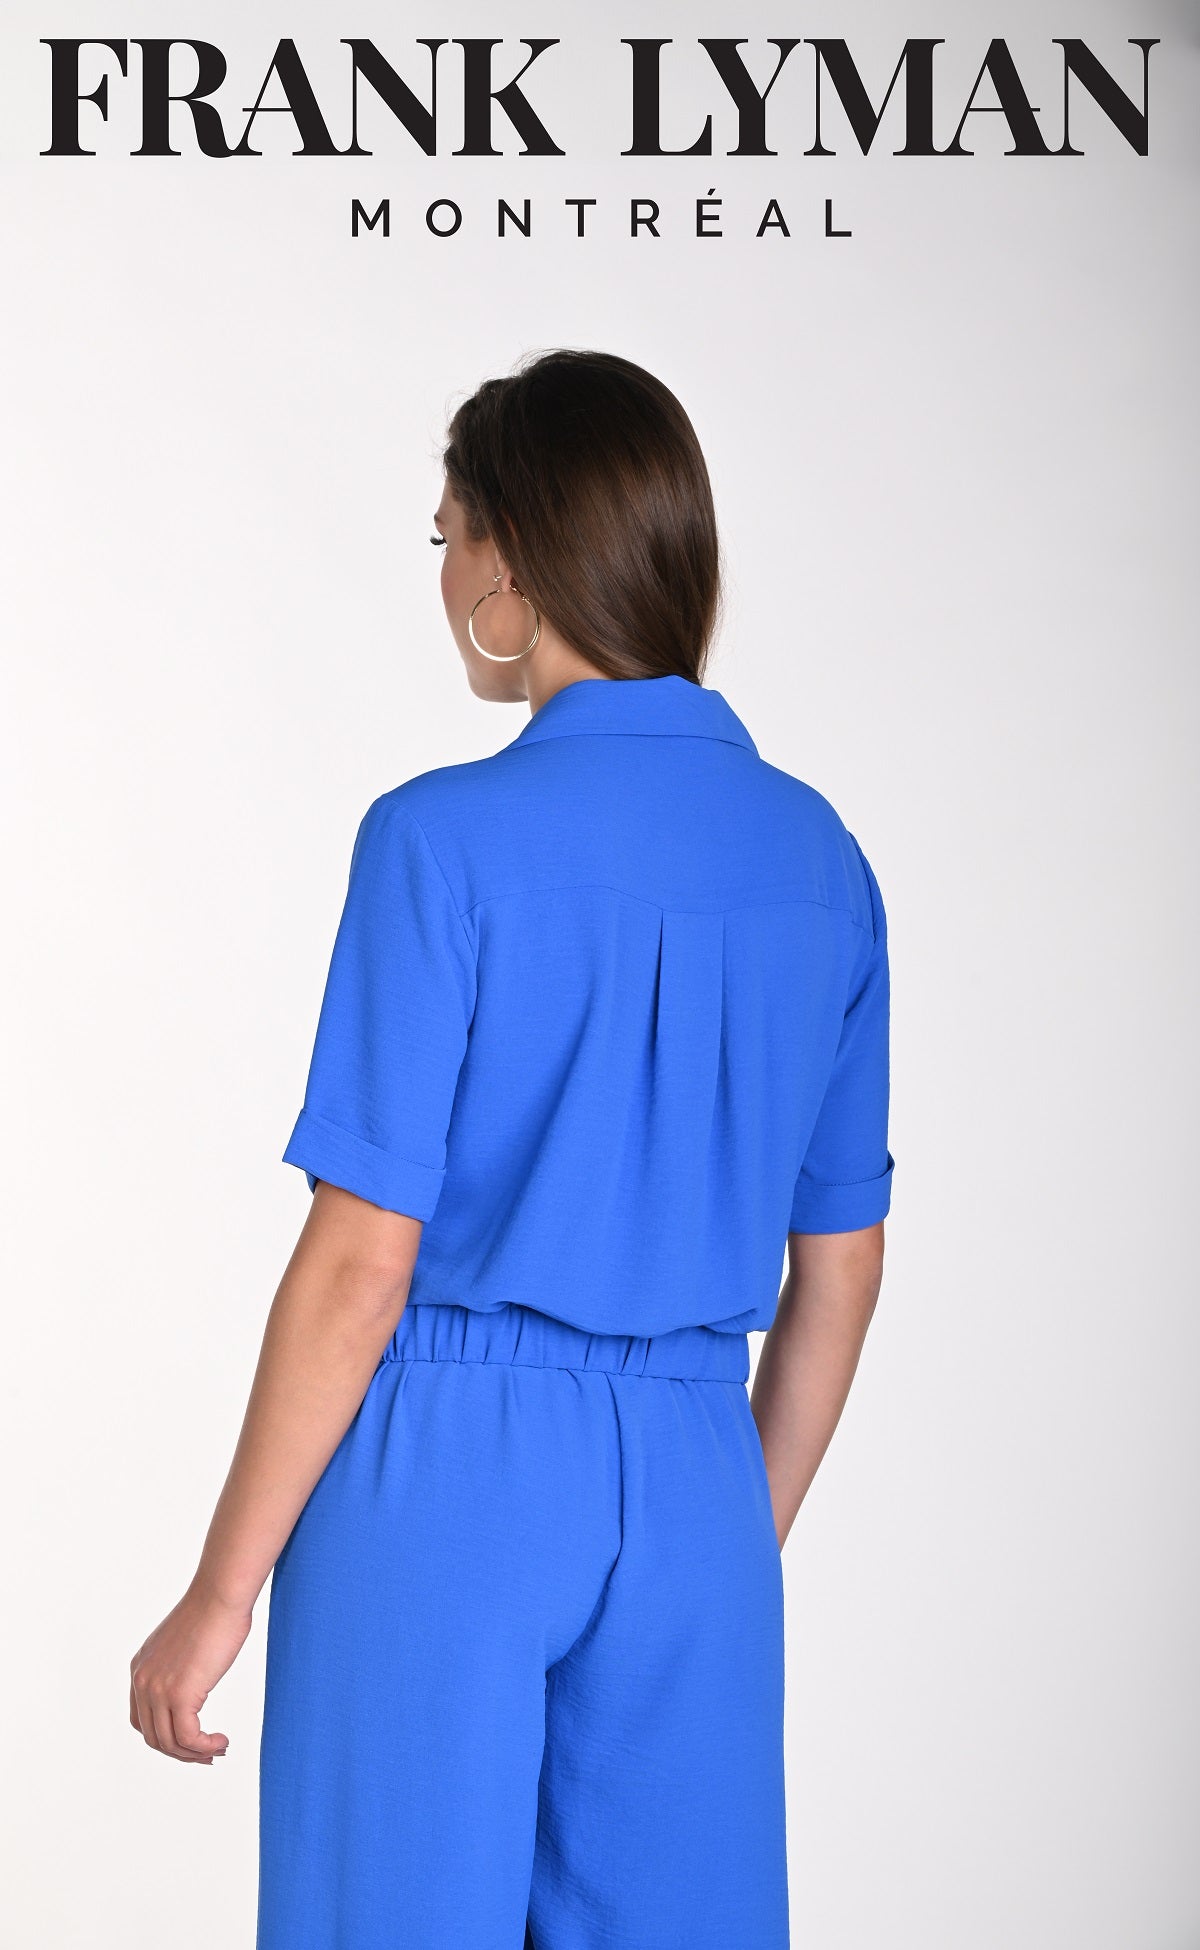 Frank Lyman Montreal Royal blue short button front blouse with pockets